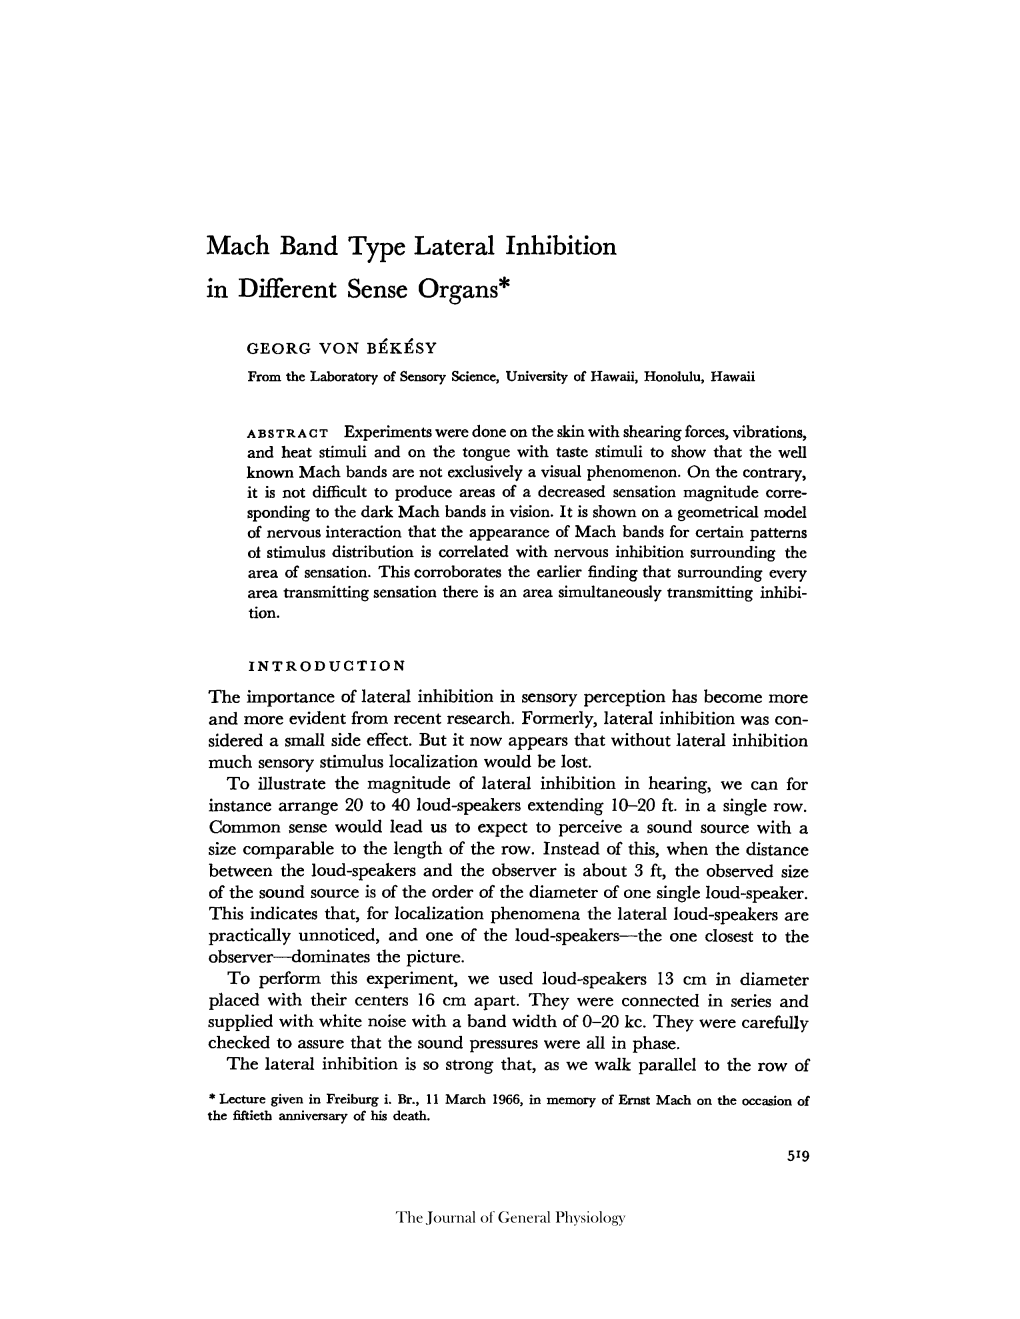 Mach Band Type Lateral Inhibition in Different Sense Organs*